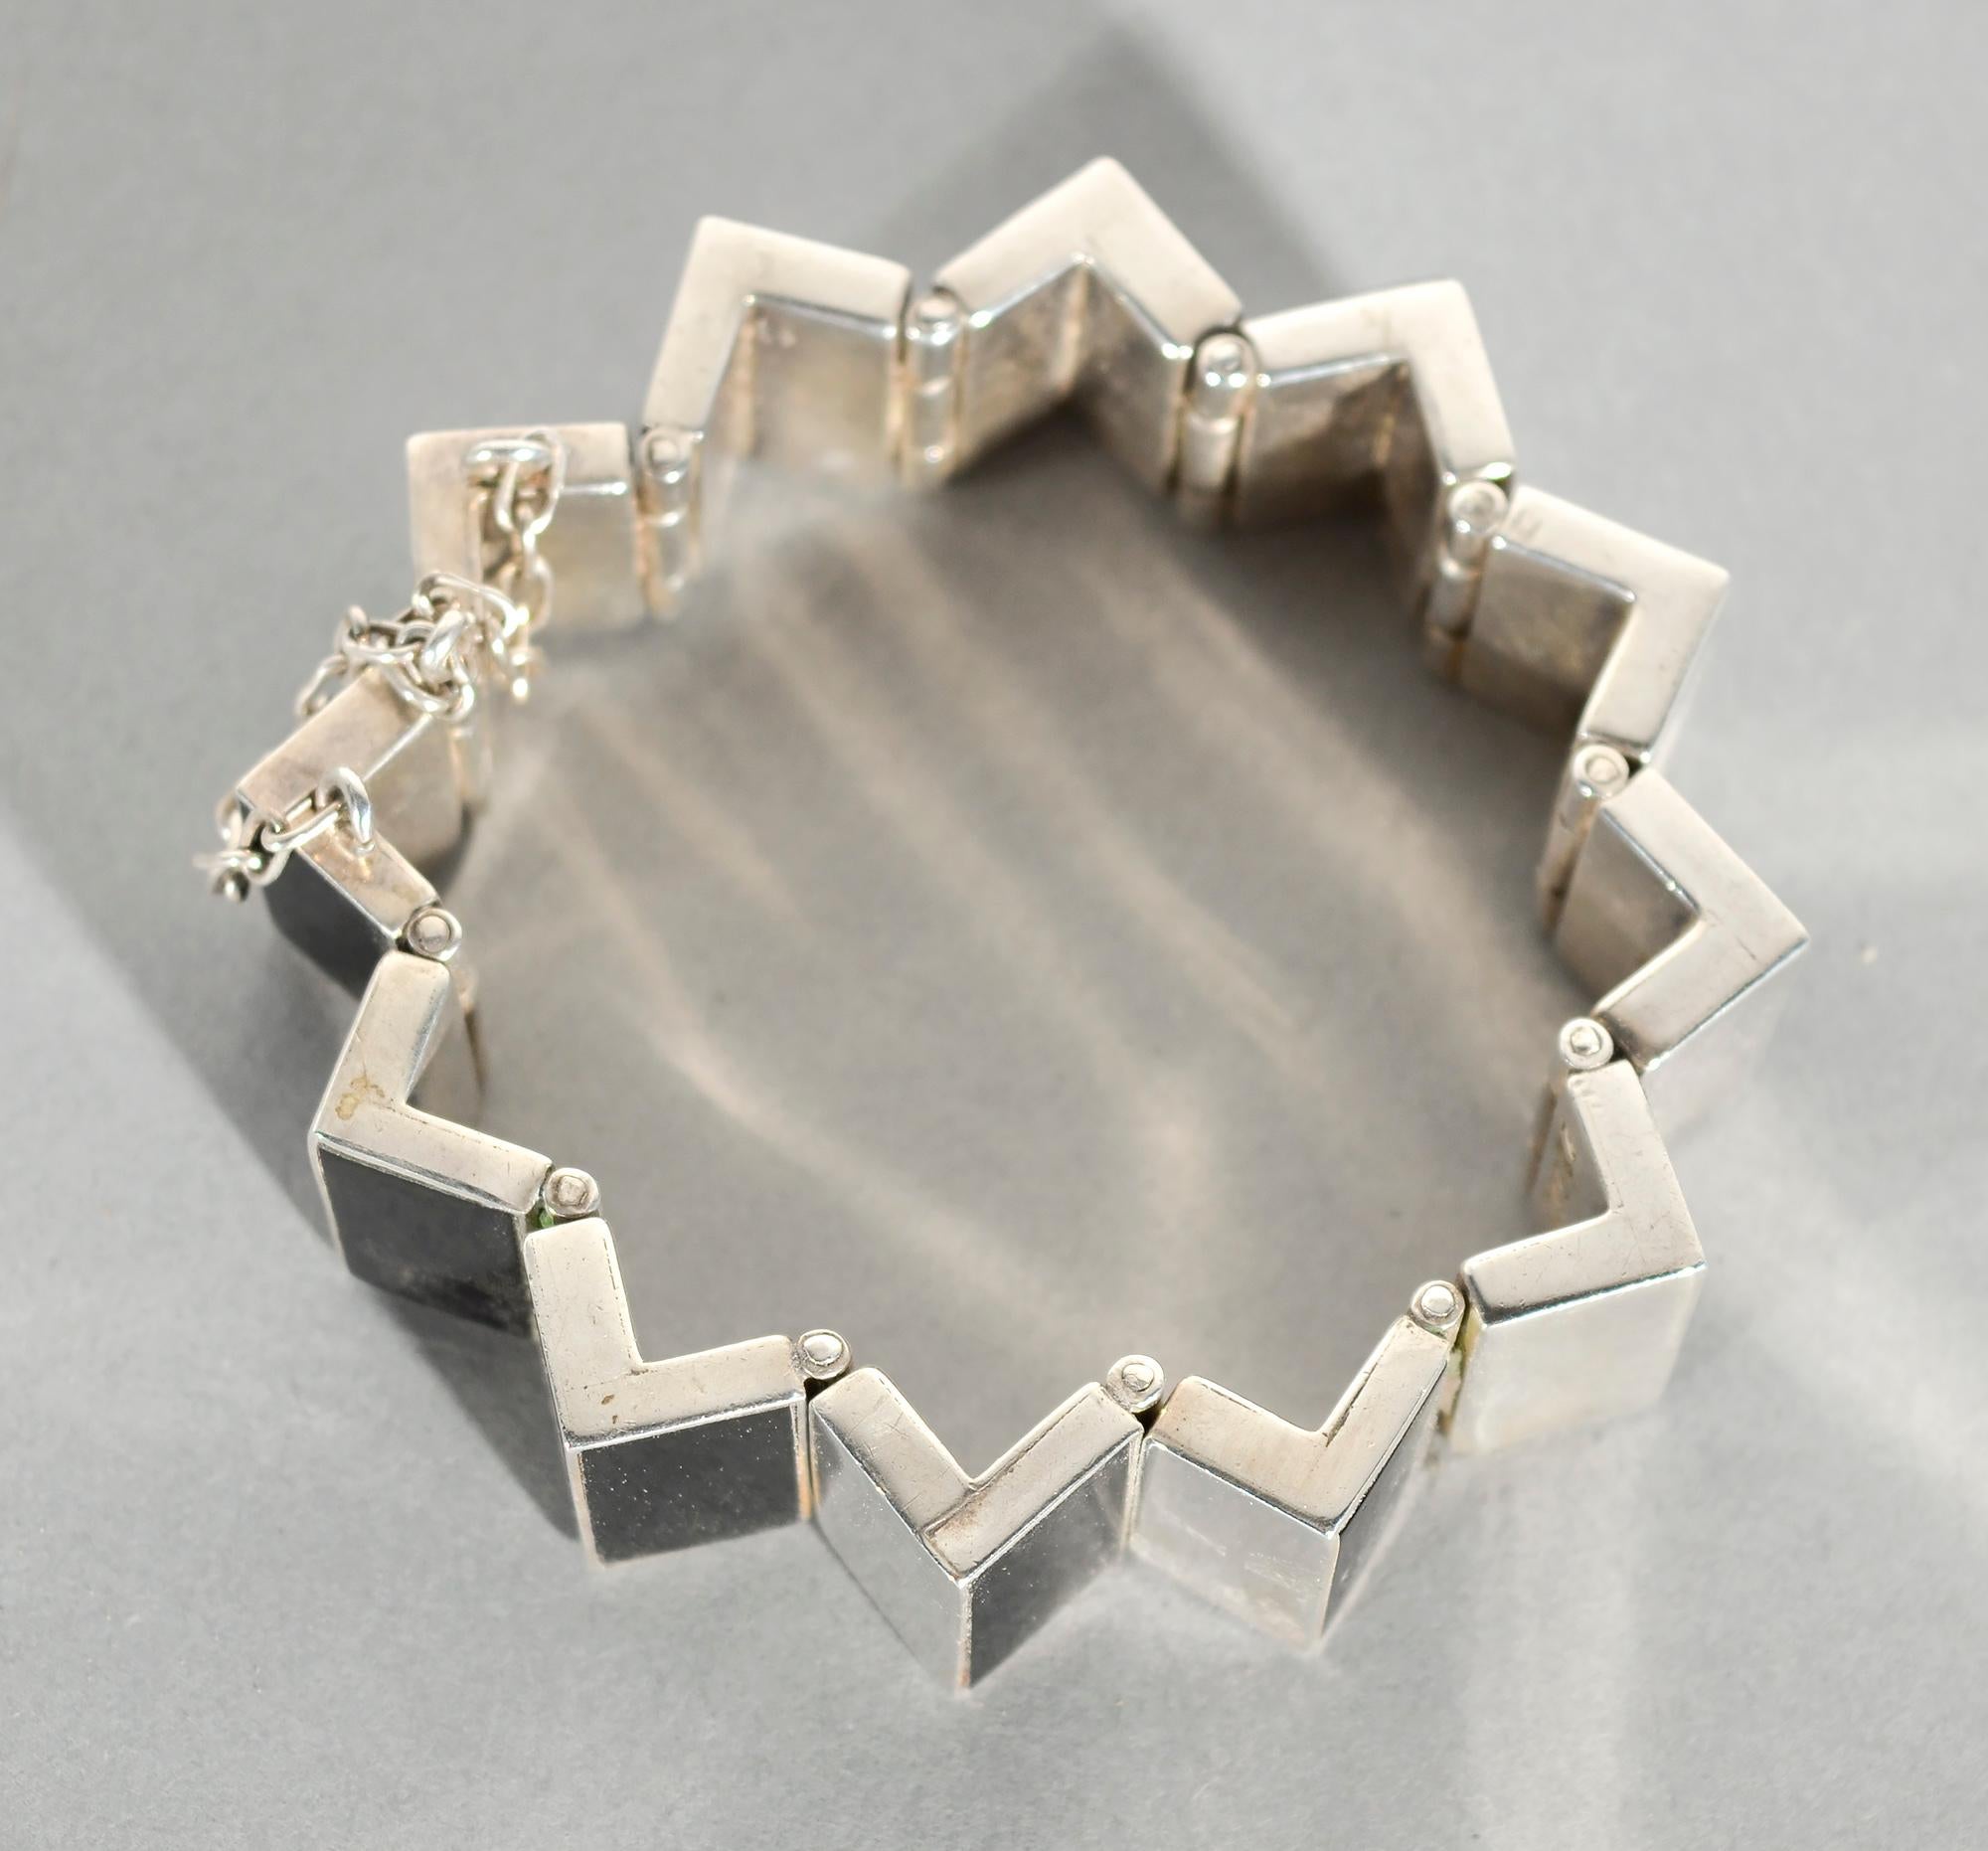 Unusual and early sterling and onyx bracelet by Antonio Pineda. Rectangular links of sterling alternate with links faced with onyx. The bracelet is illustrated in : Stuart Hodosh, et al. 